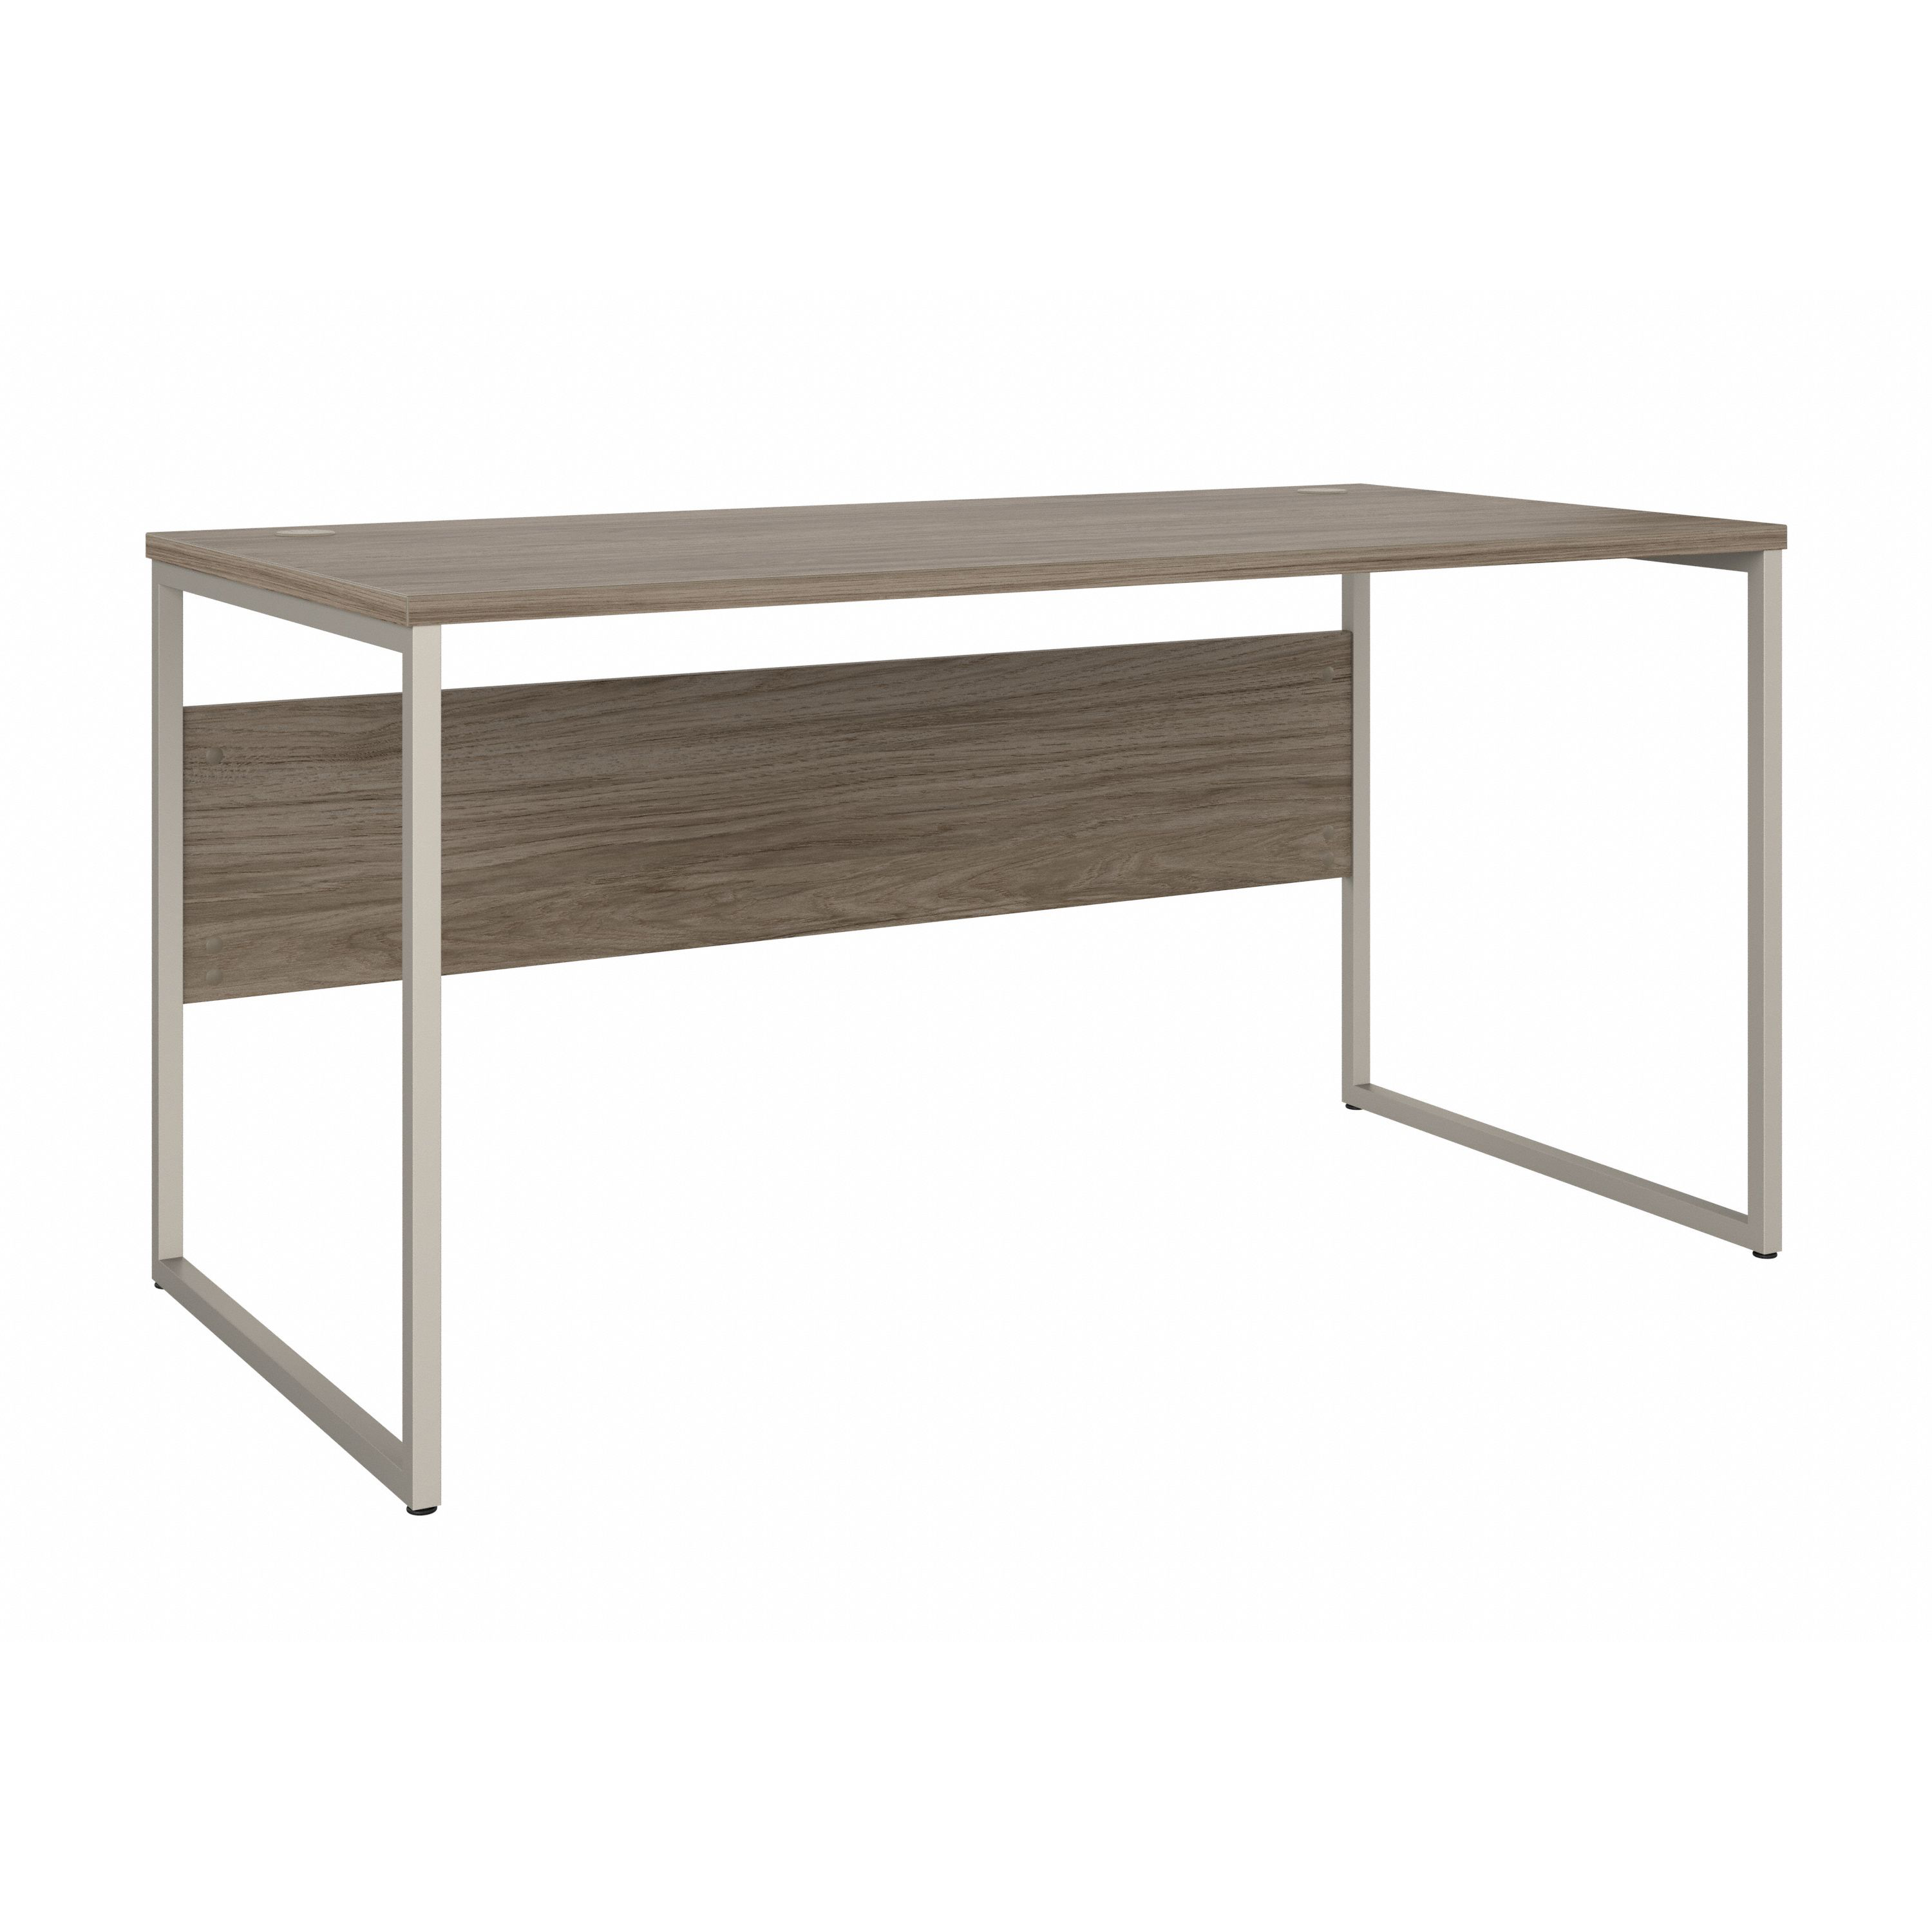 Shop Bush Business Furniture Hybrid 60W x 30D Computer Table Desk with Metal Legs 02 HYD360MH #color_modern hickory